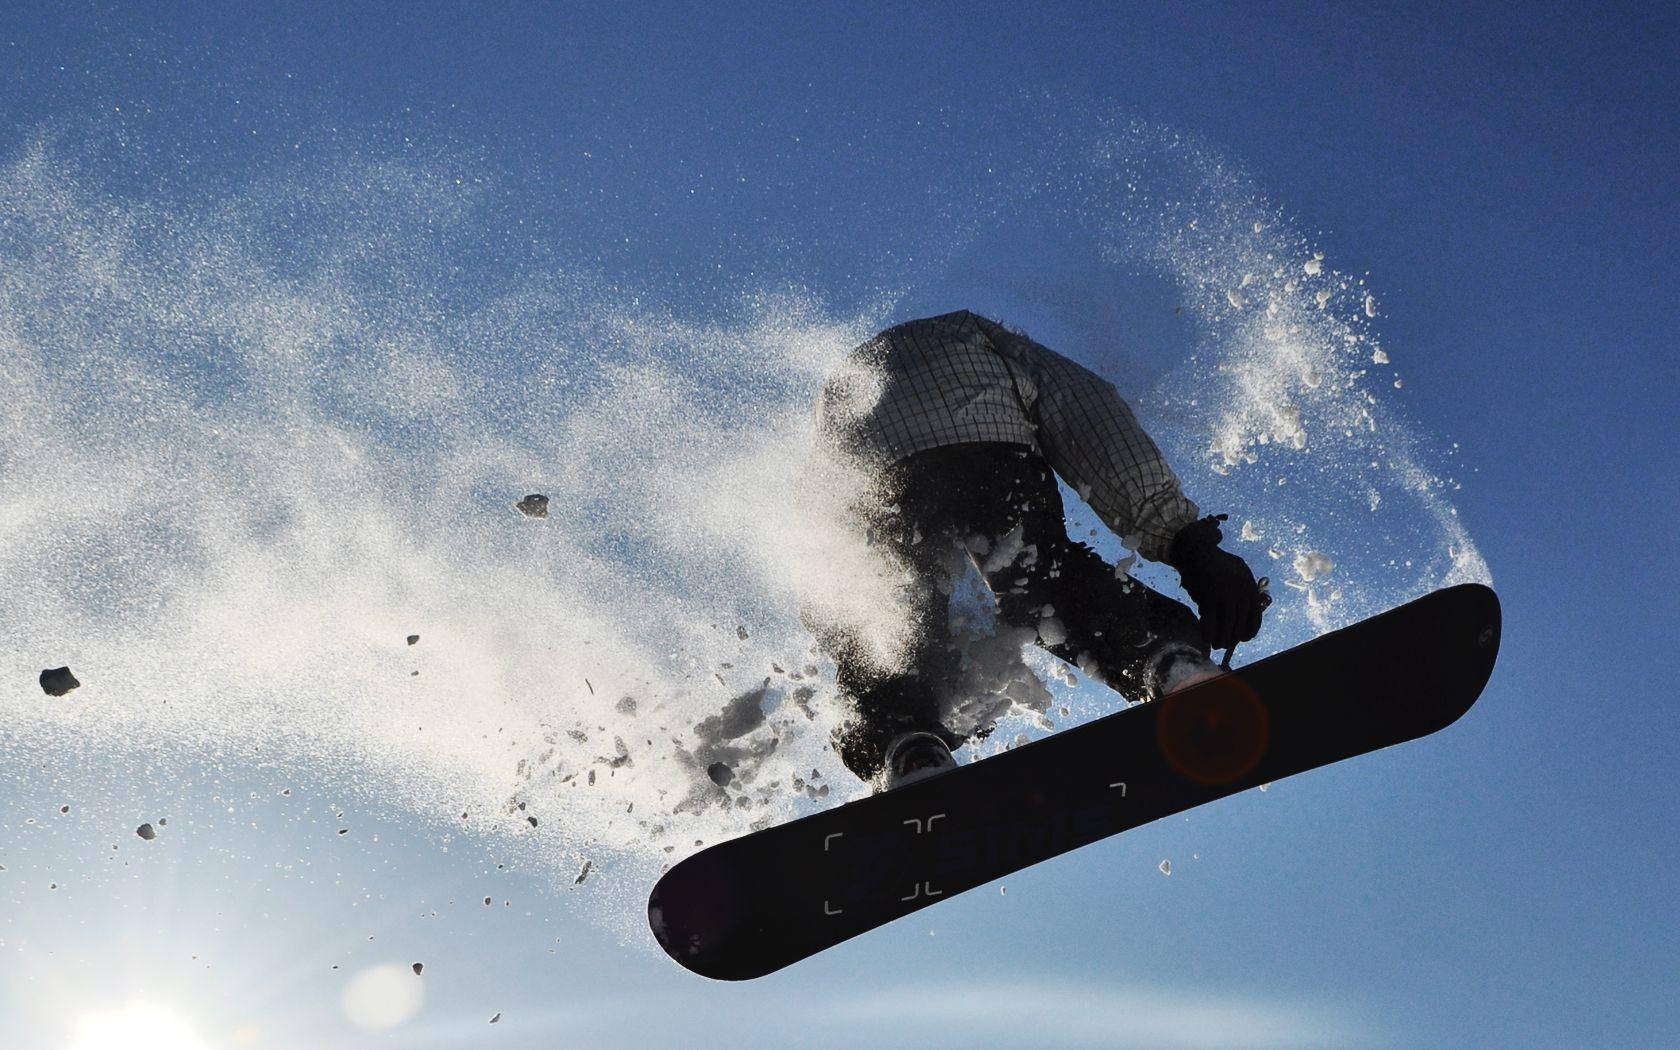 X Games Snowboarder Low-angle Shot Background